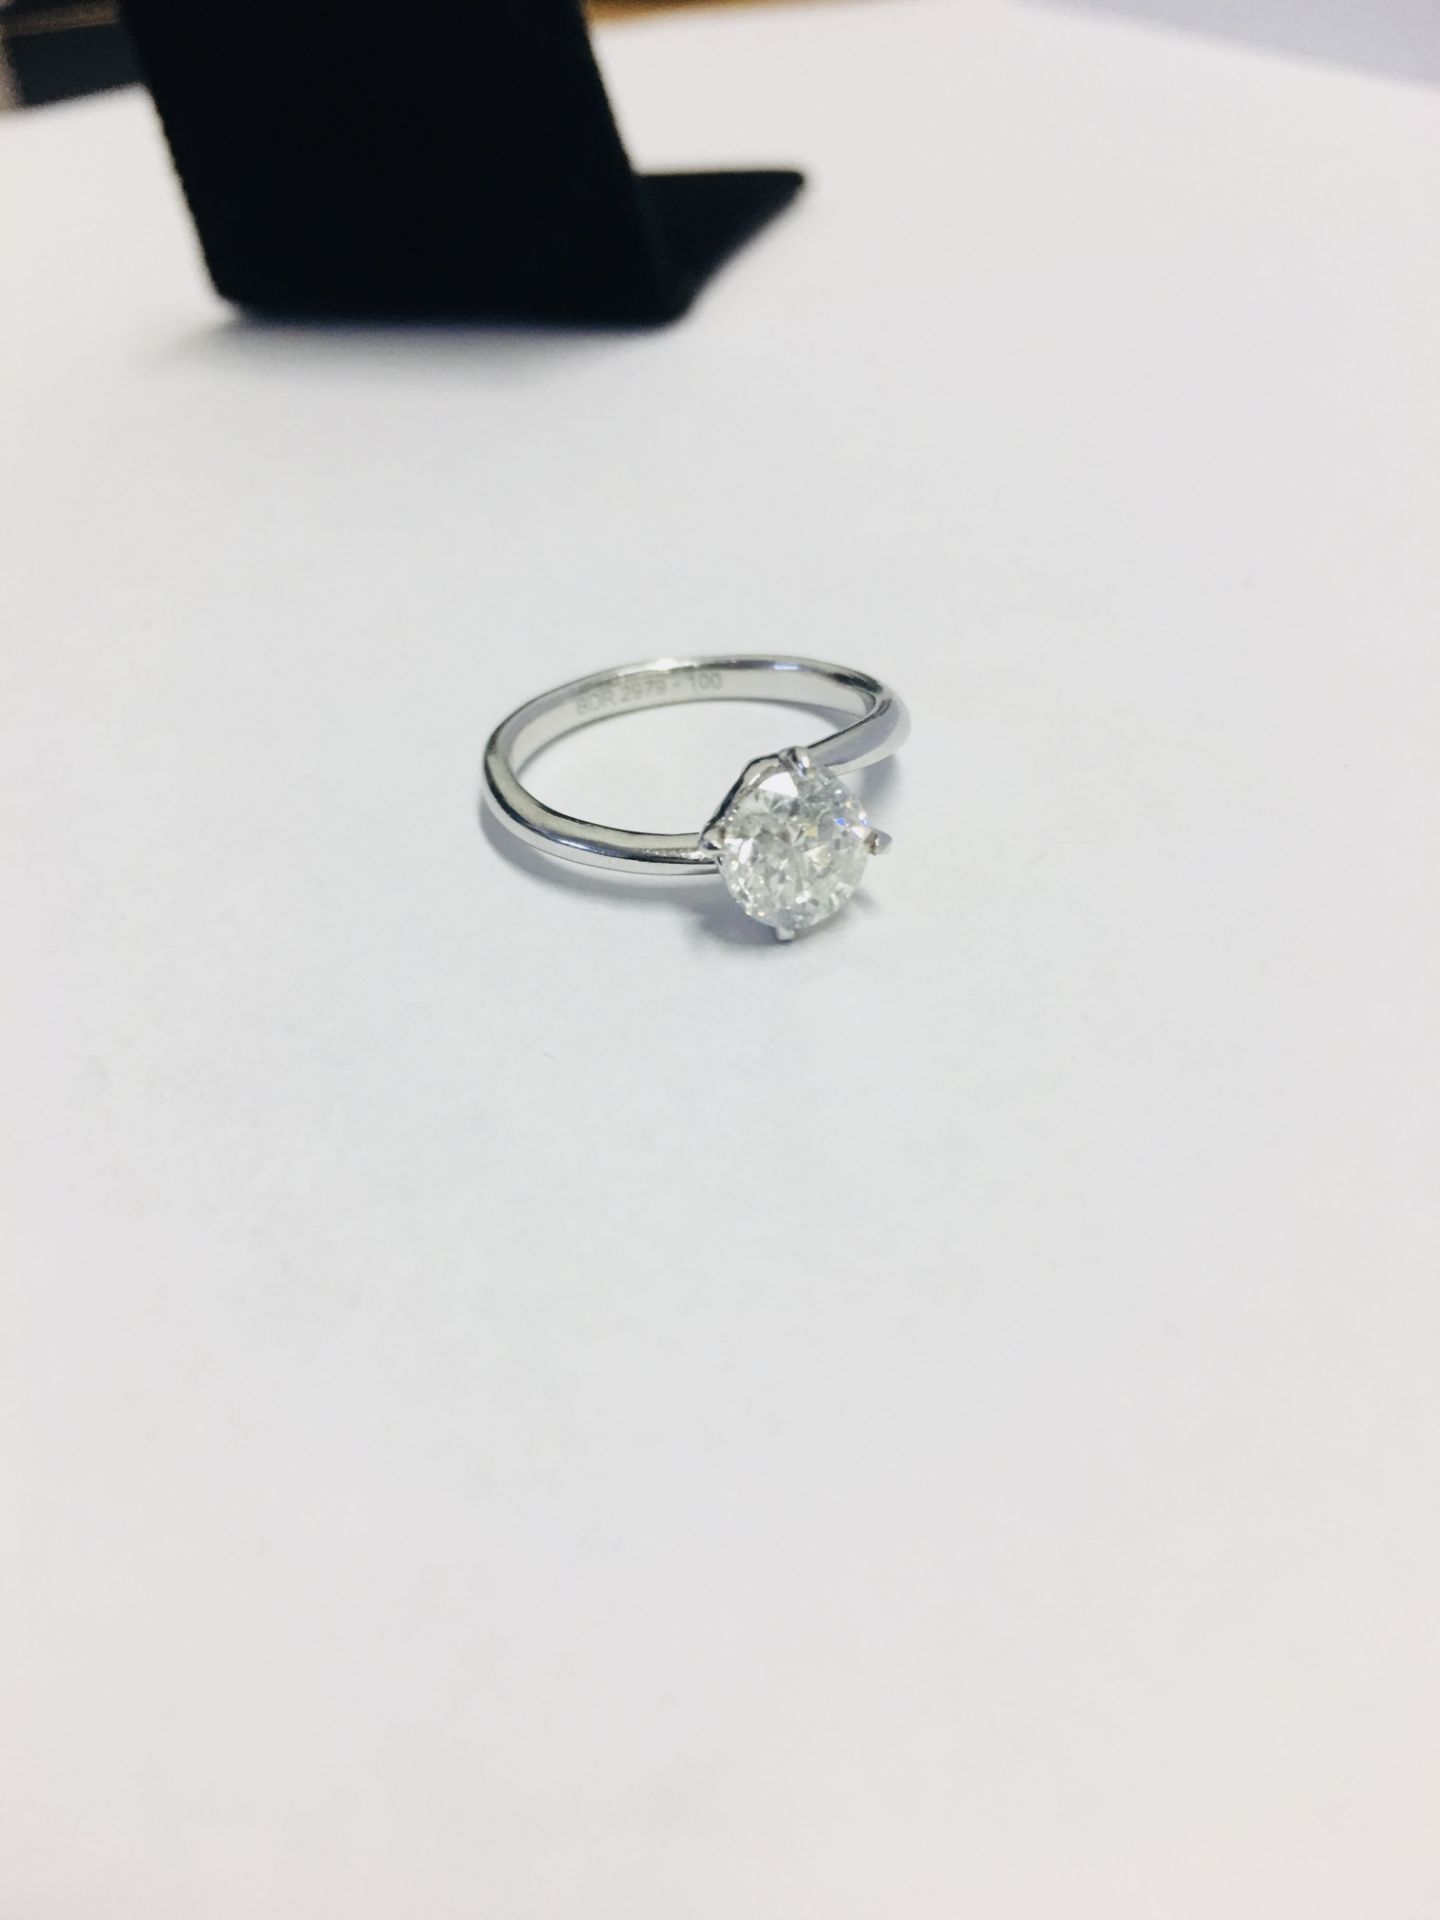 1.00ct Diamond solitaire Ring - Image 2 of 6